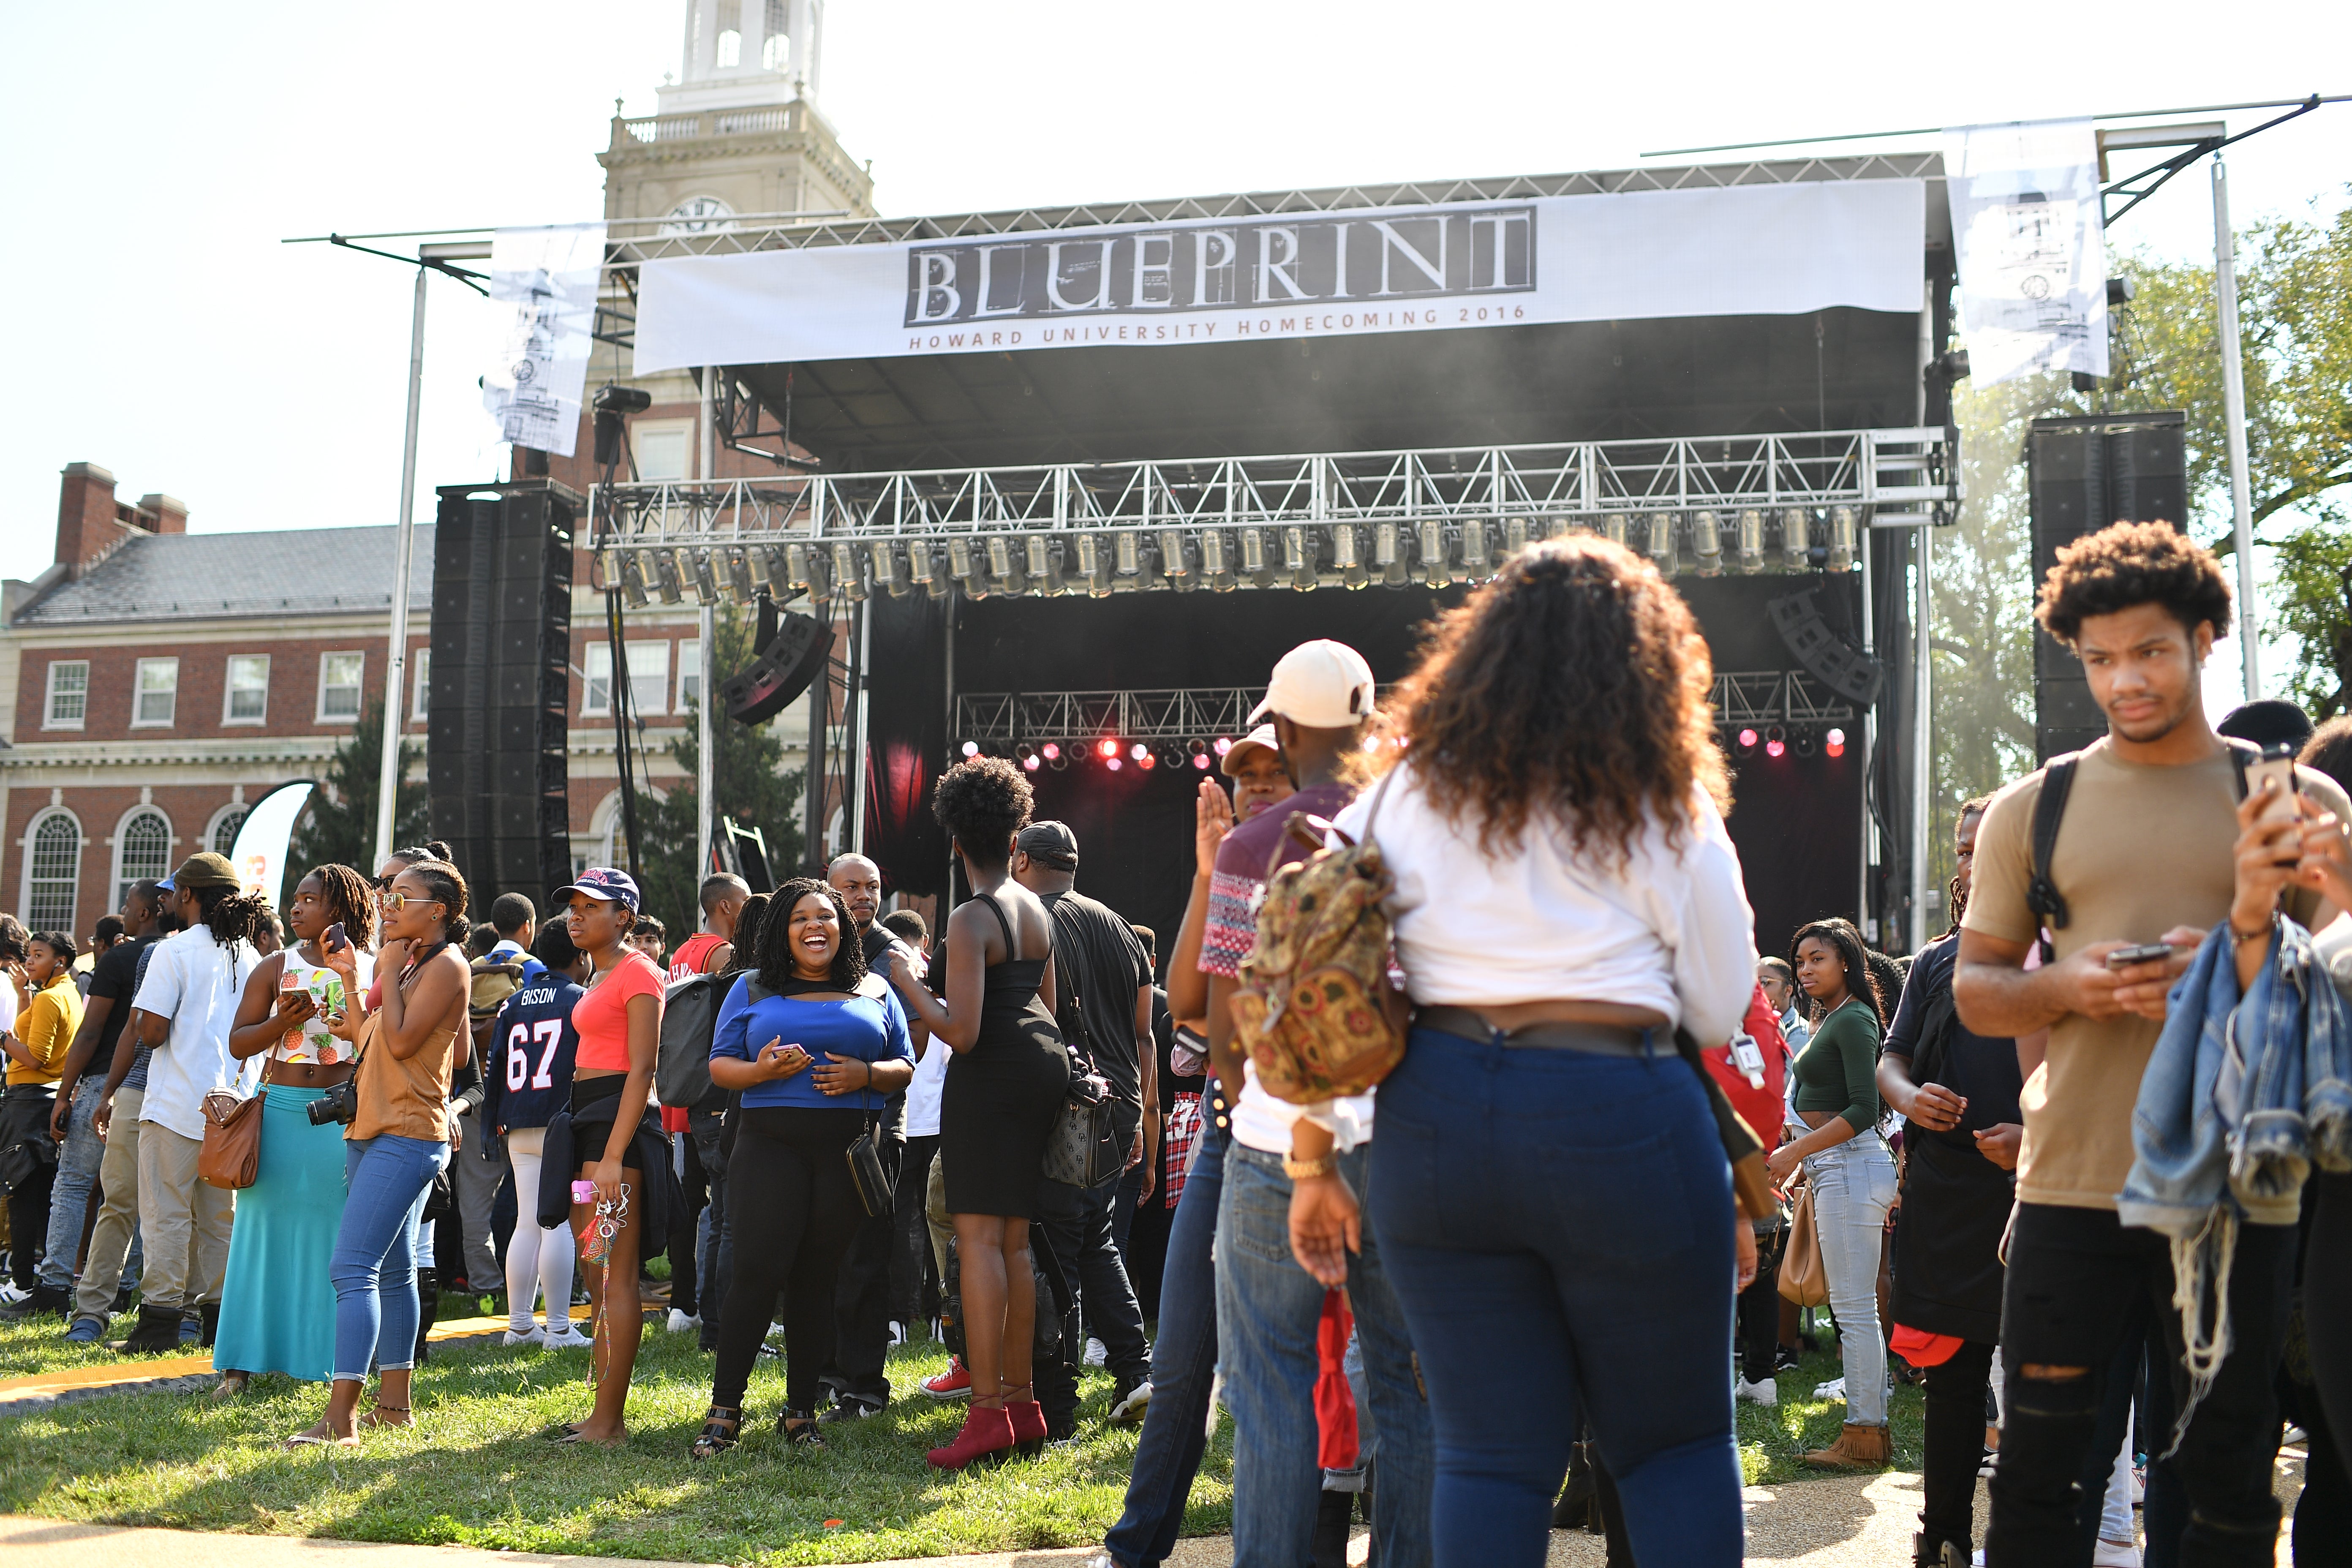 7 Experiences Every Black Woman Should Have At An HBCU
